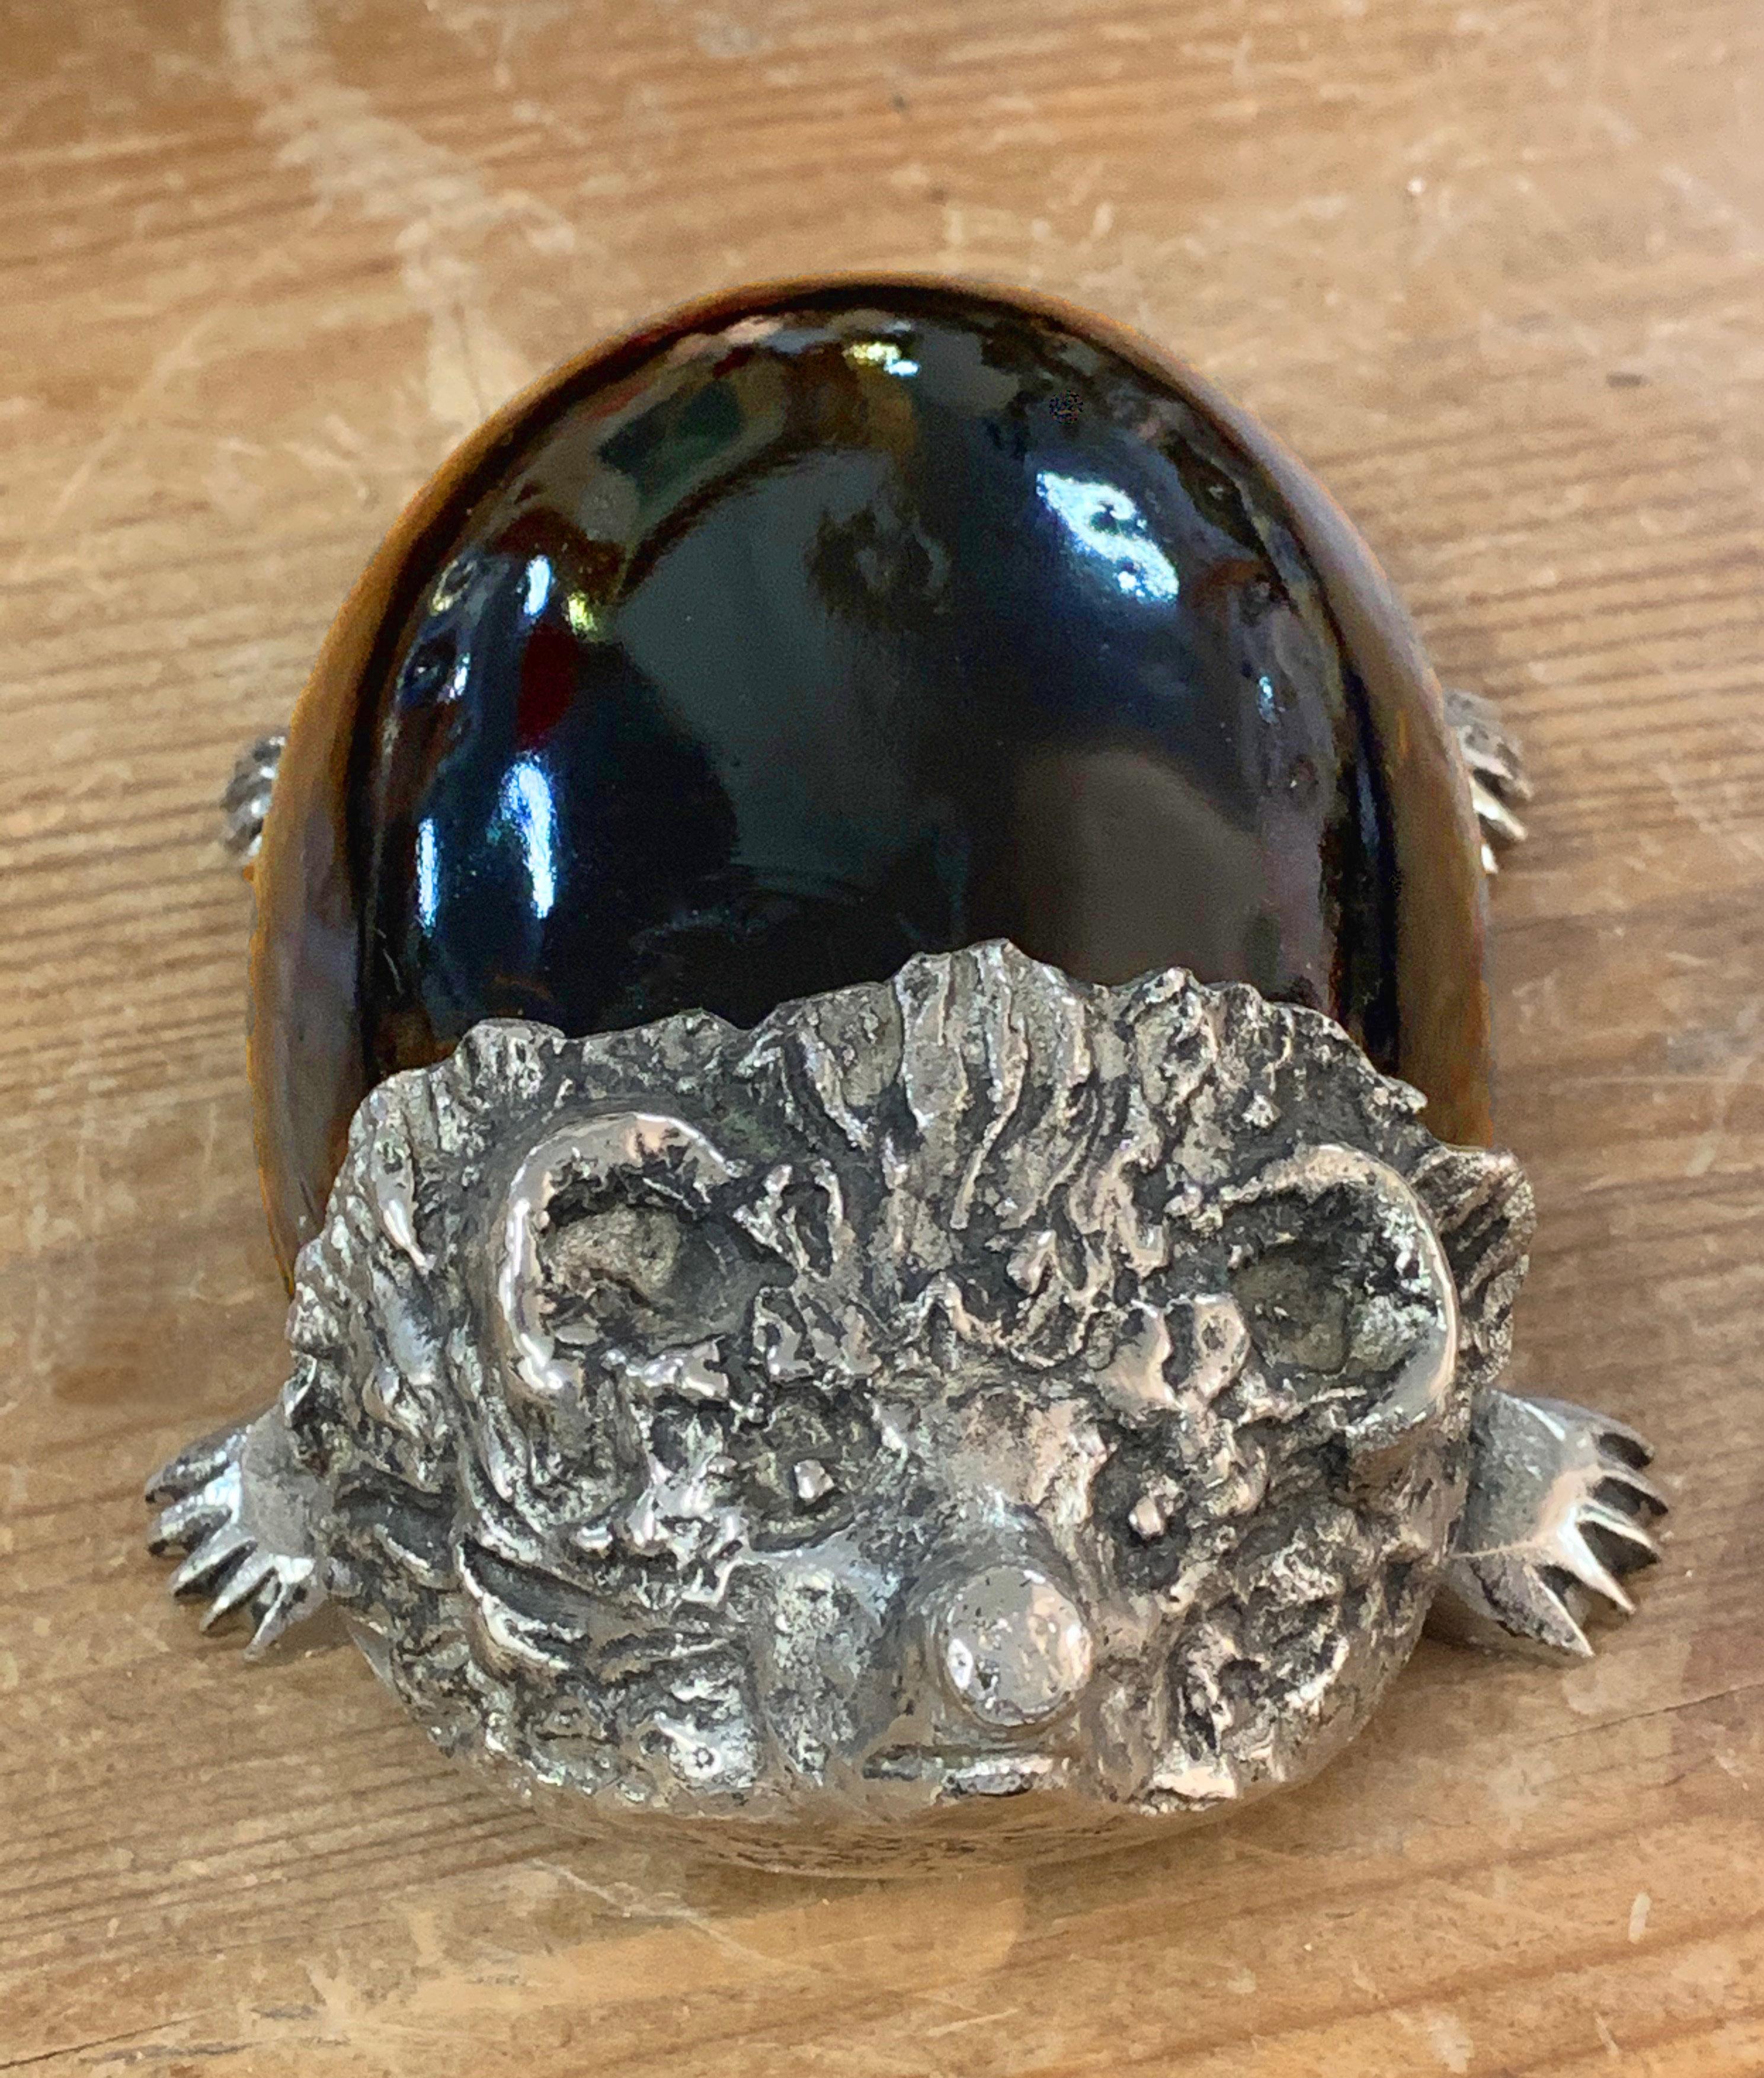 A beautiful Hedgehog sculpture in Murano glass and silver plate. This item was made in Italy in the 1970s.

The body of the hedgehog is in solid Murano glass with an amber-like colour, while the legs and the head are in silver plate.

This piece